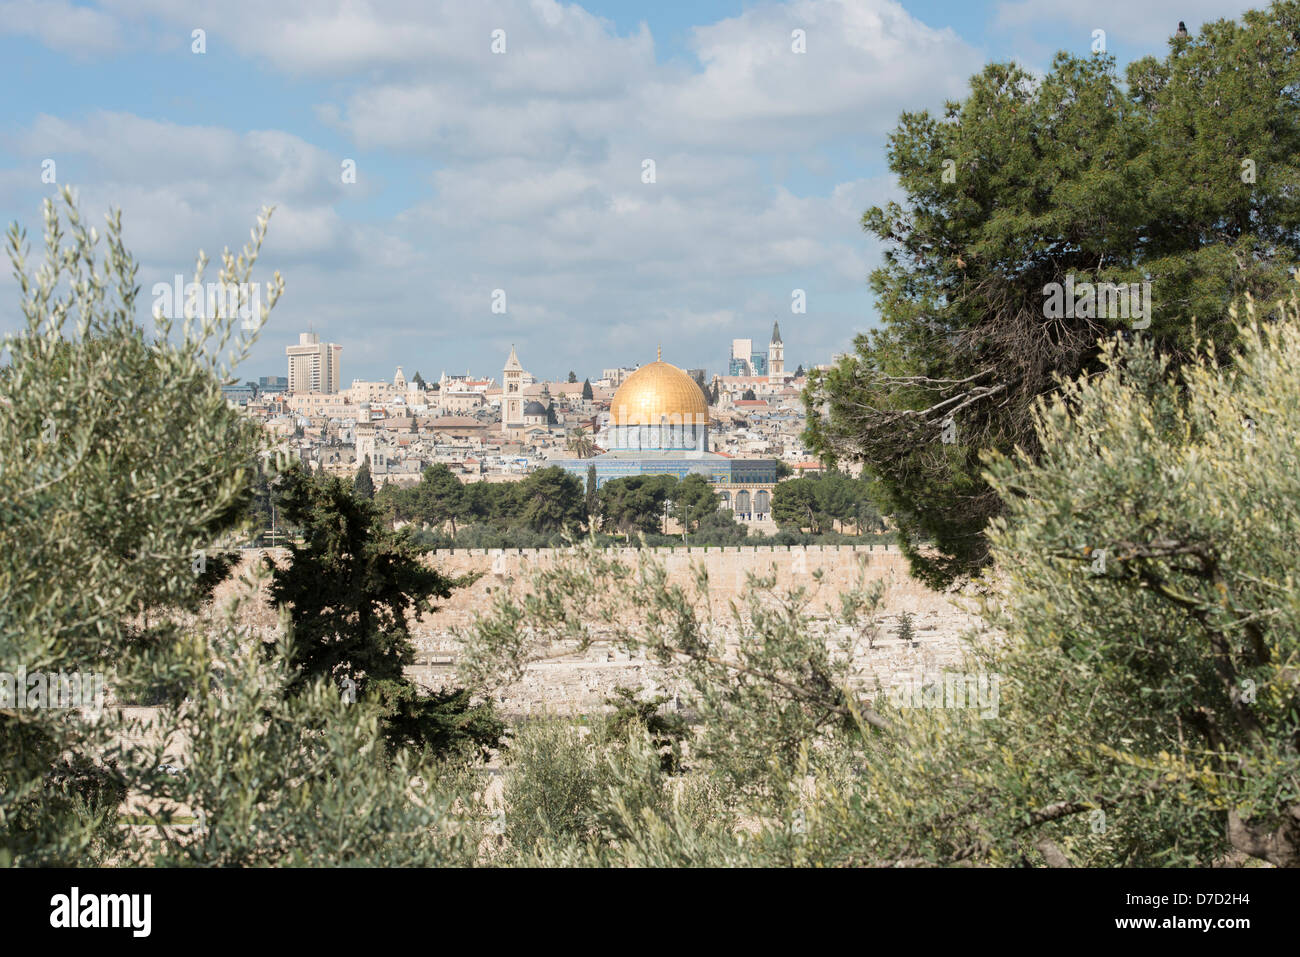 The Golden dome of the Islamic Dome of the Rock inside the old city walls in Jerusalem, Israel Stock Photo